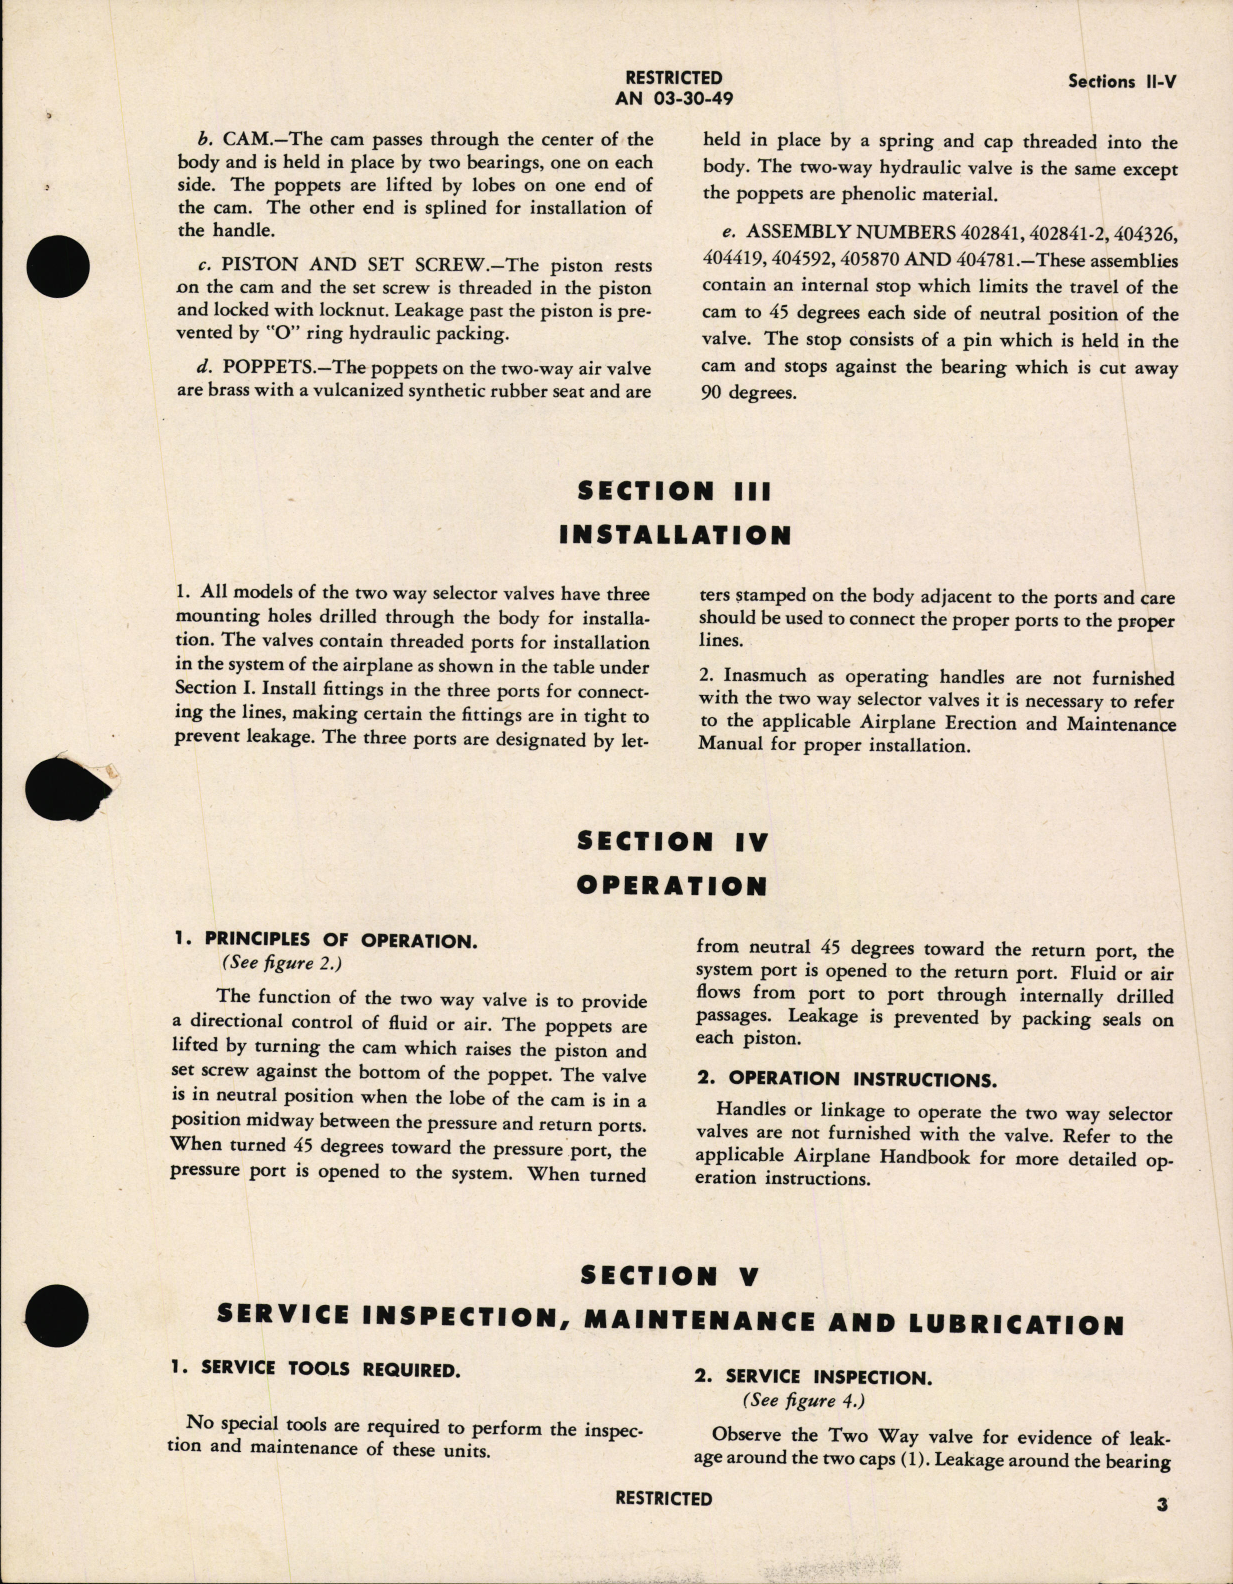 Sample page 7 from AirCorps Library document: Operation, Service and Overhaul Instructions with Parts Catalog for Two-Way Hydraulic and Air Valves